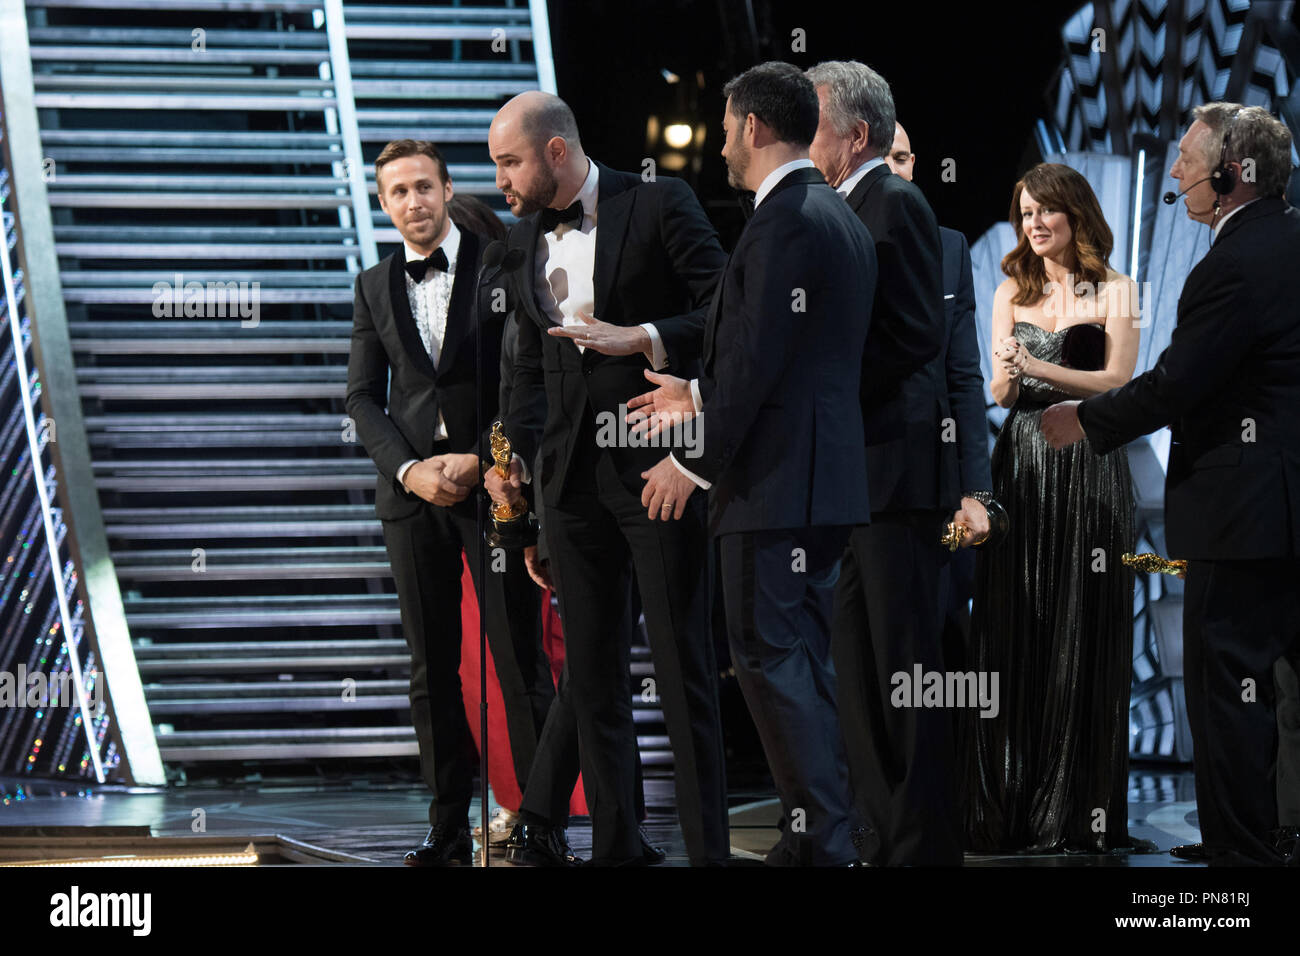 https://c8.alamy.com/comp/PN81RJ/host-jimmy-kimmel-informs-the-cast-of-la-la-land-that-there-was-a-mix-up-onstage-during-the-89th-oscars-at-the-dolby-theatre-in-hollywood-ca-on-sunday-february-26-2017-file-reference-33242-505tha-for-editorial-use-only-all-rights-reserved-PN81RJ.jpg